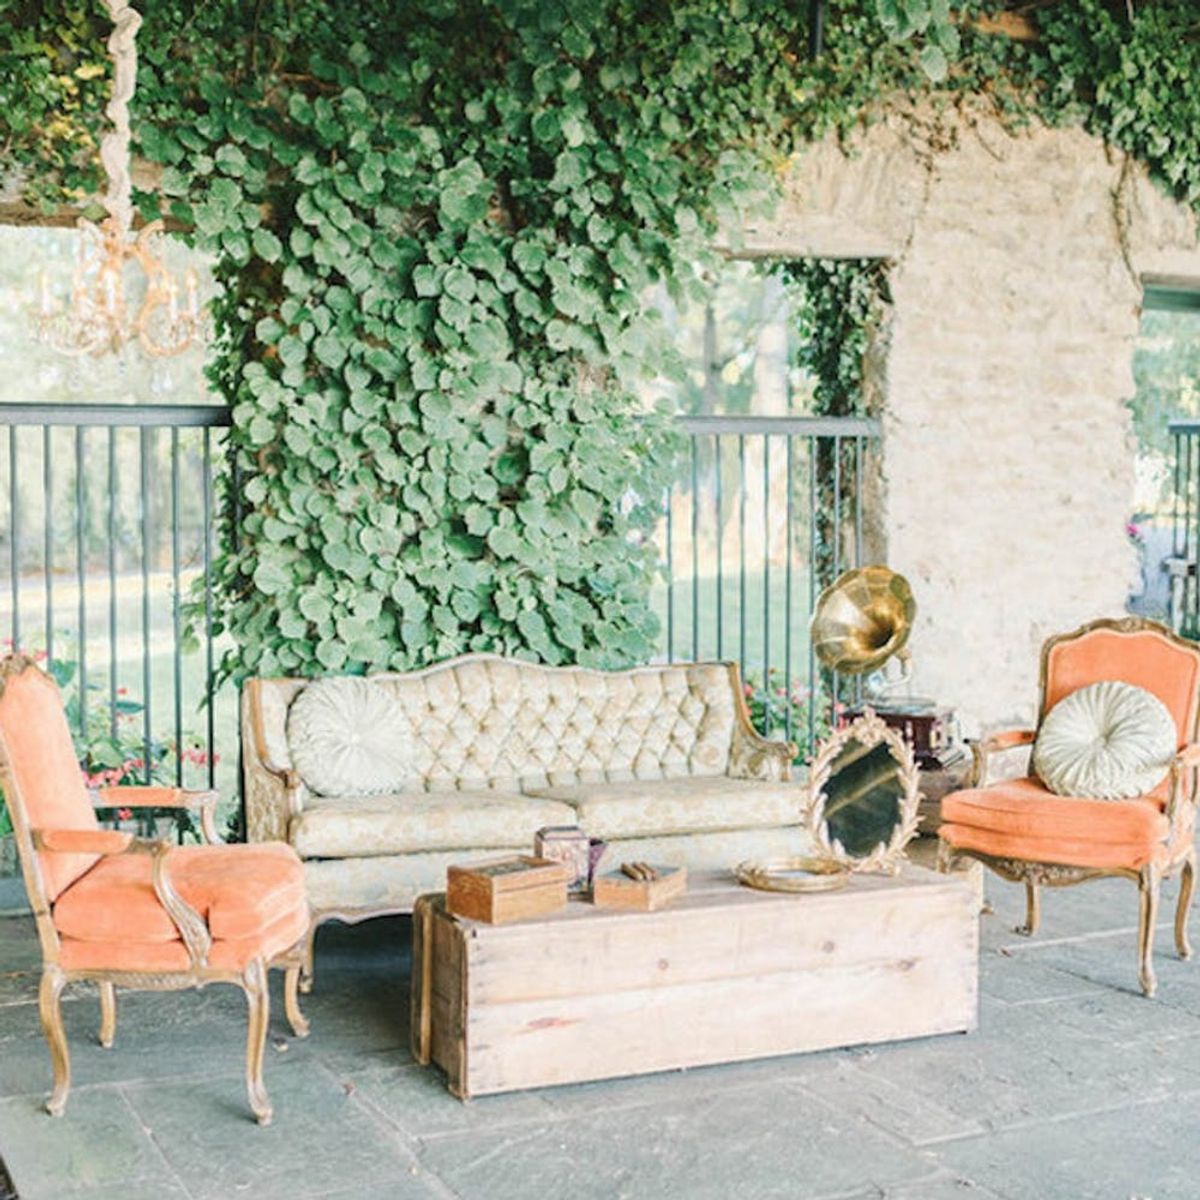 12 Wedding Cocktail Lounges for Your Big Day